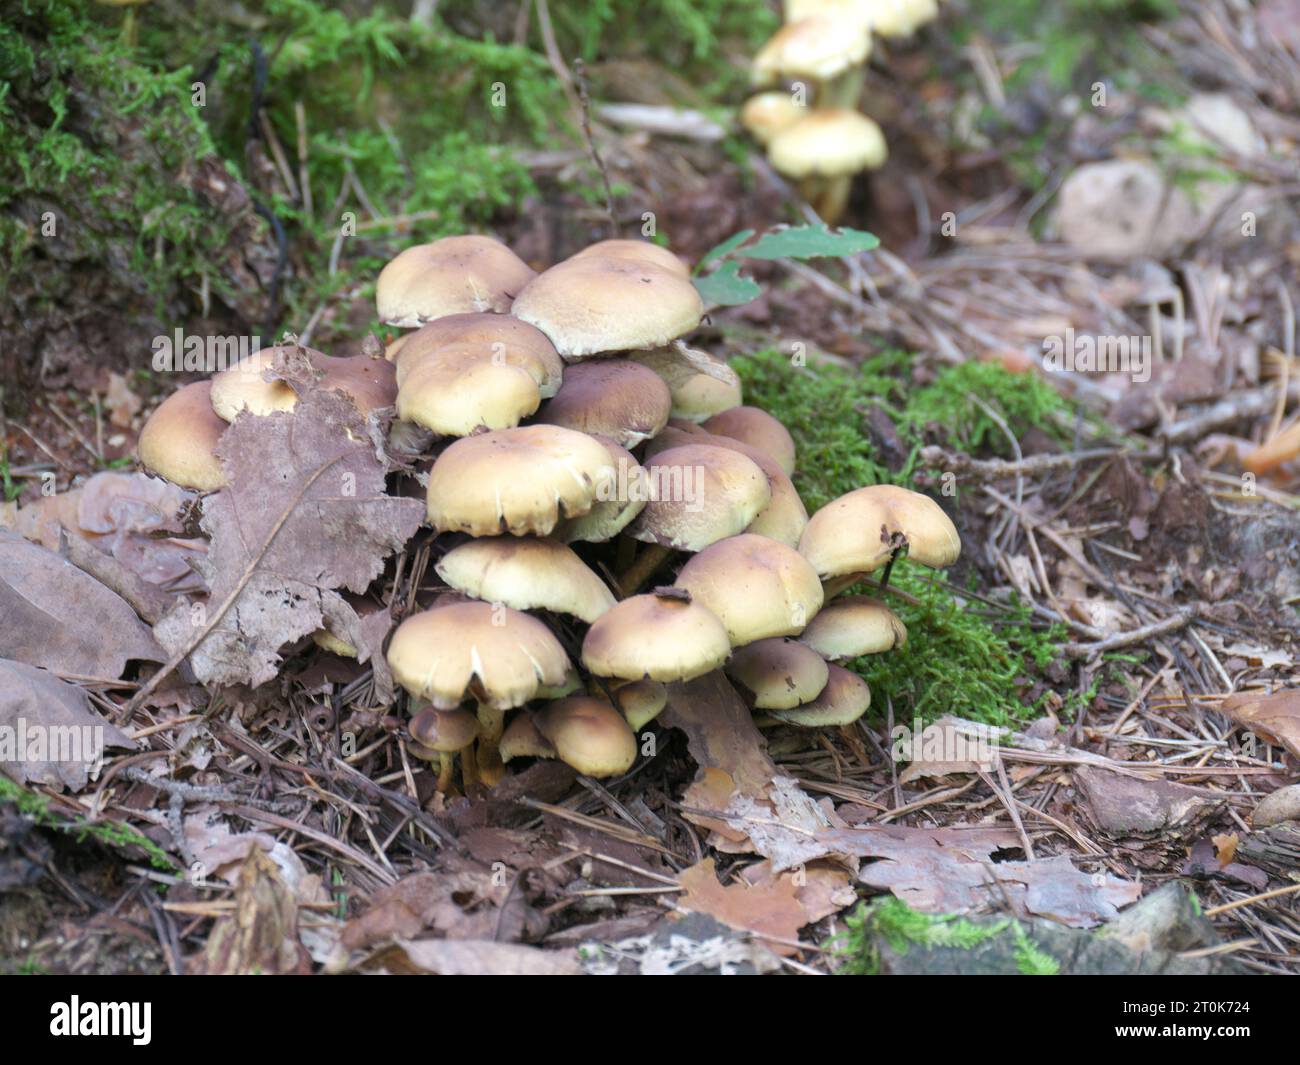 The fruiting bodies and mushroom caps of sulfur heads Hypholoma stand next to moss on forest soil Stock Photo